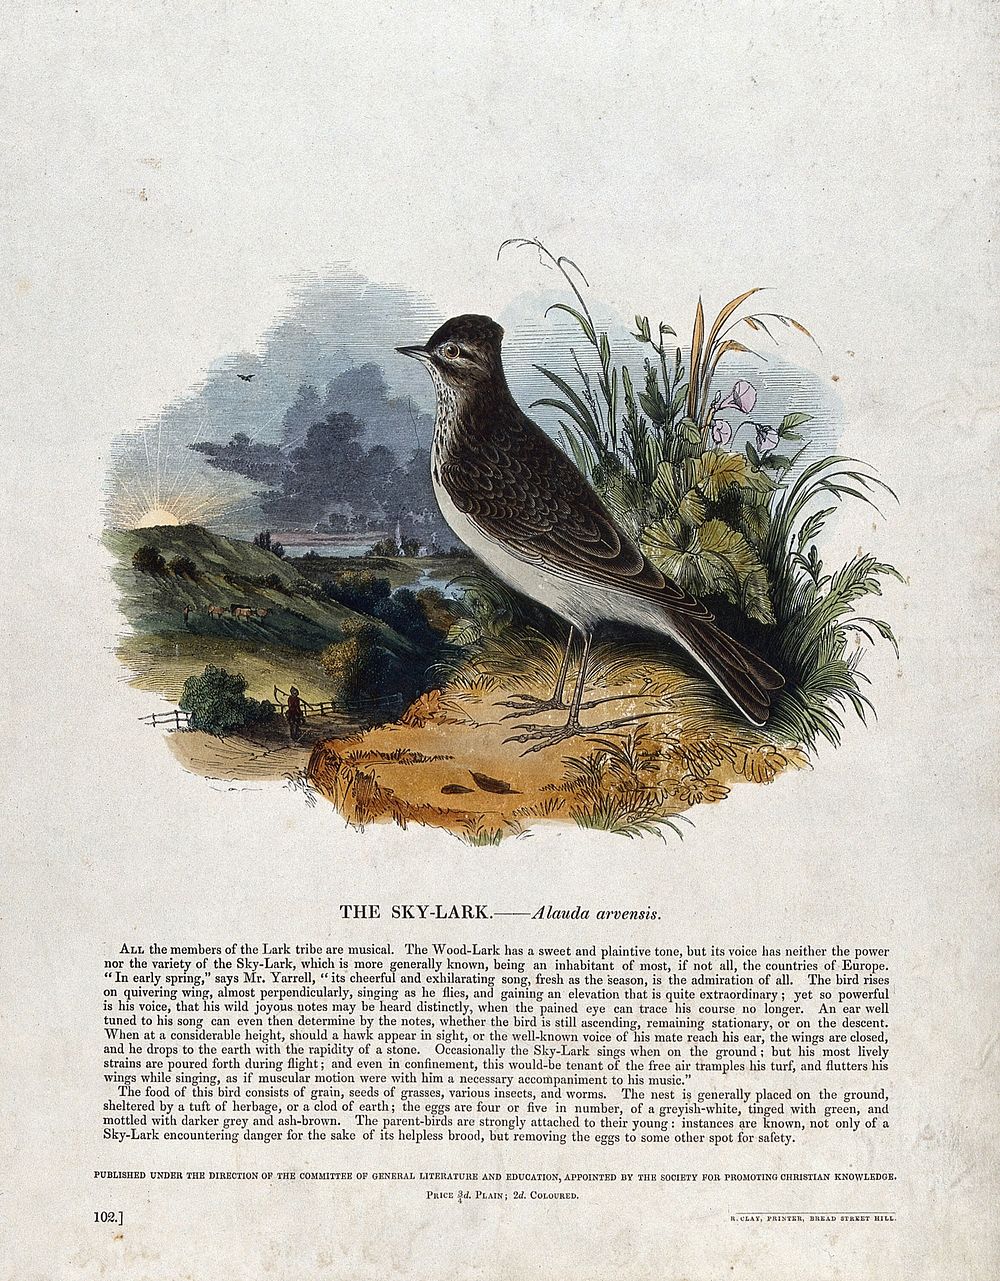 A sky-lark sitting on a rock before a bucolic landscape. Coloured wood engraving by J. W. Whimper.